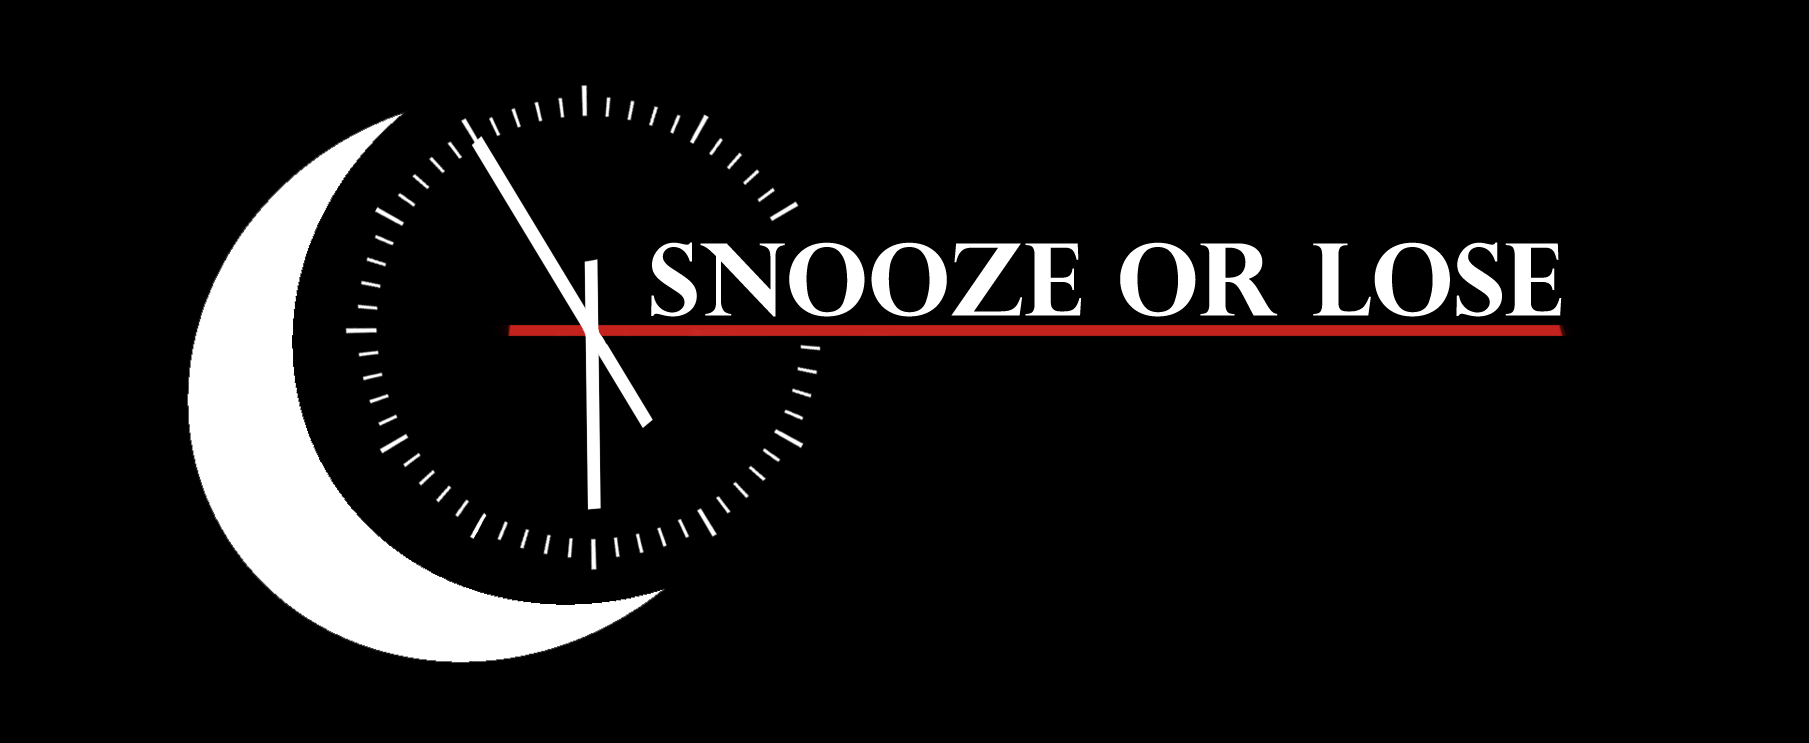 SNOOZE OR LOSE